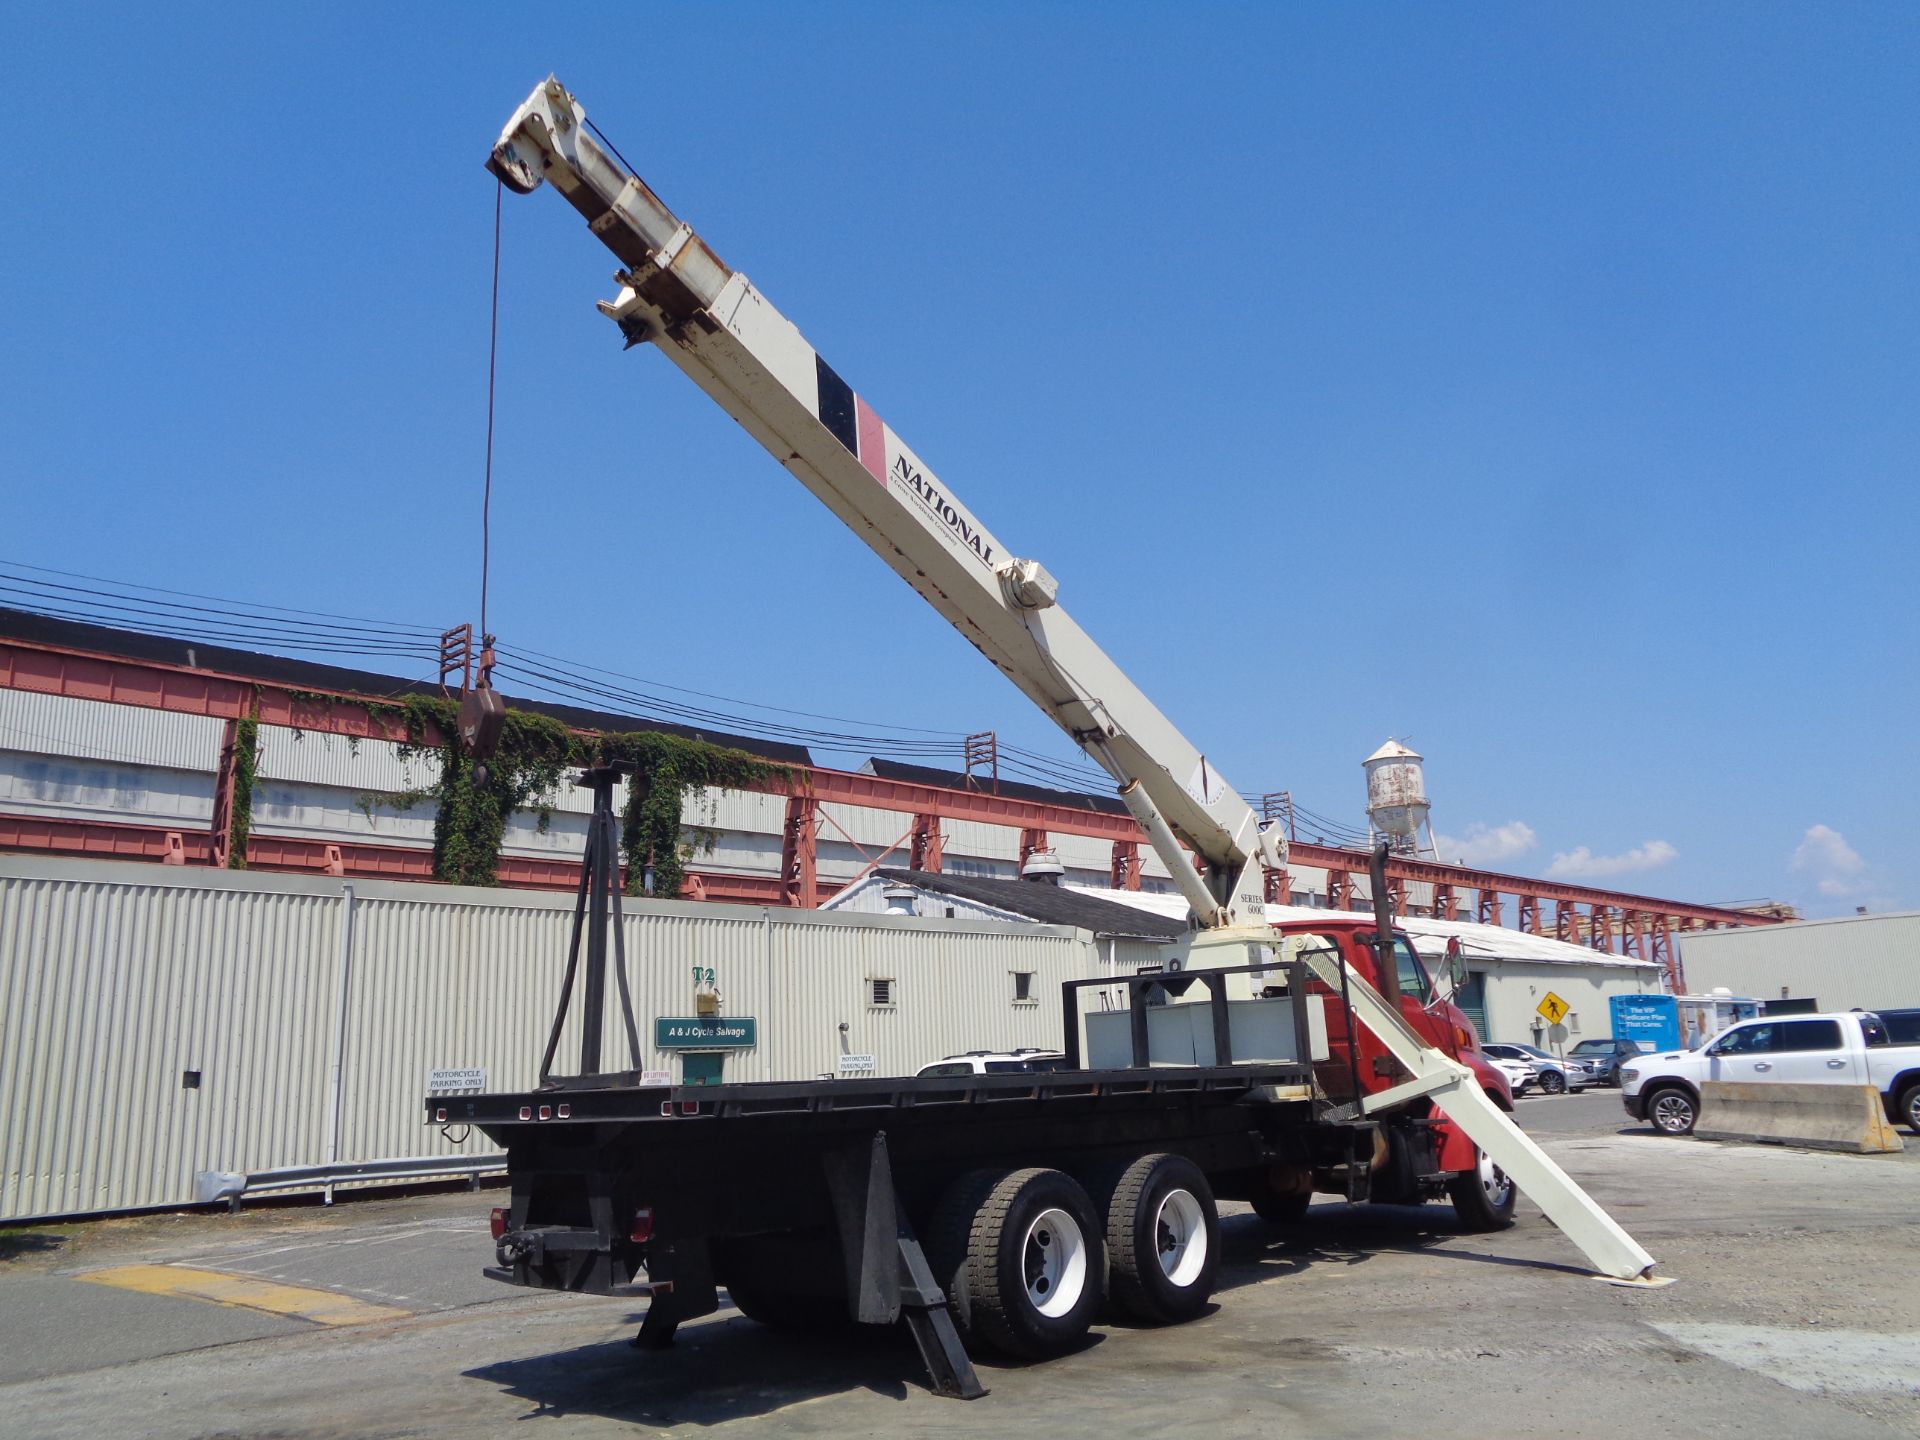 National 681C 17Ton Hydraulic Crane mounted behind cab on Sterling LT8500 T/A Flatbed Truck - Image 11 of 28